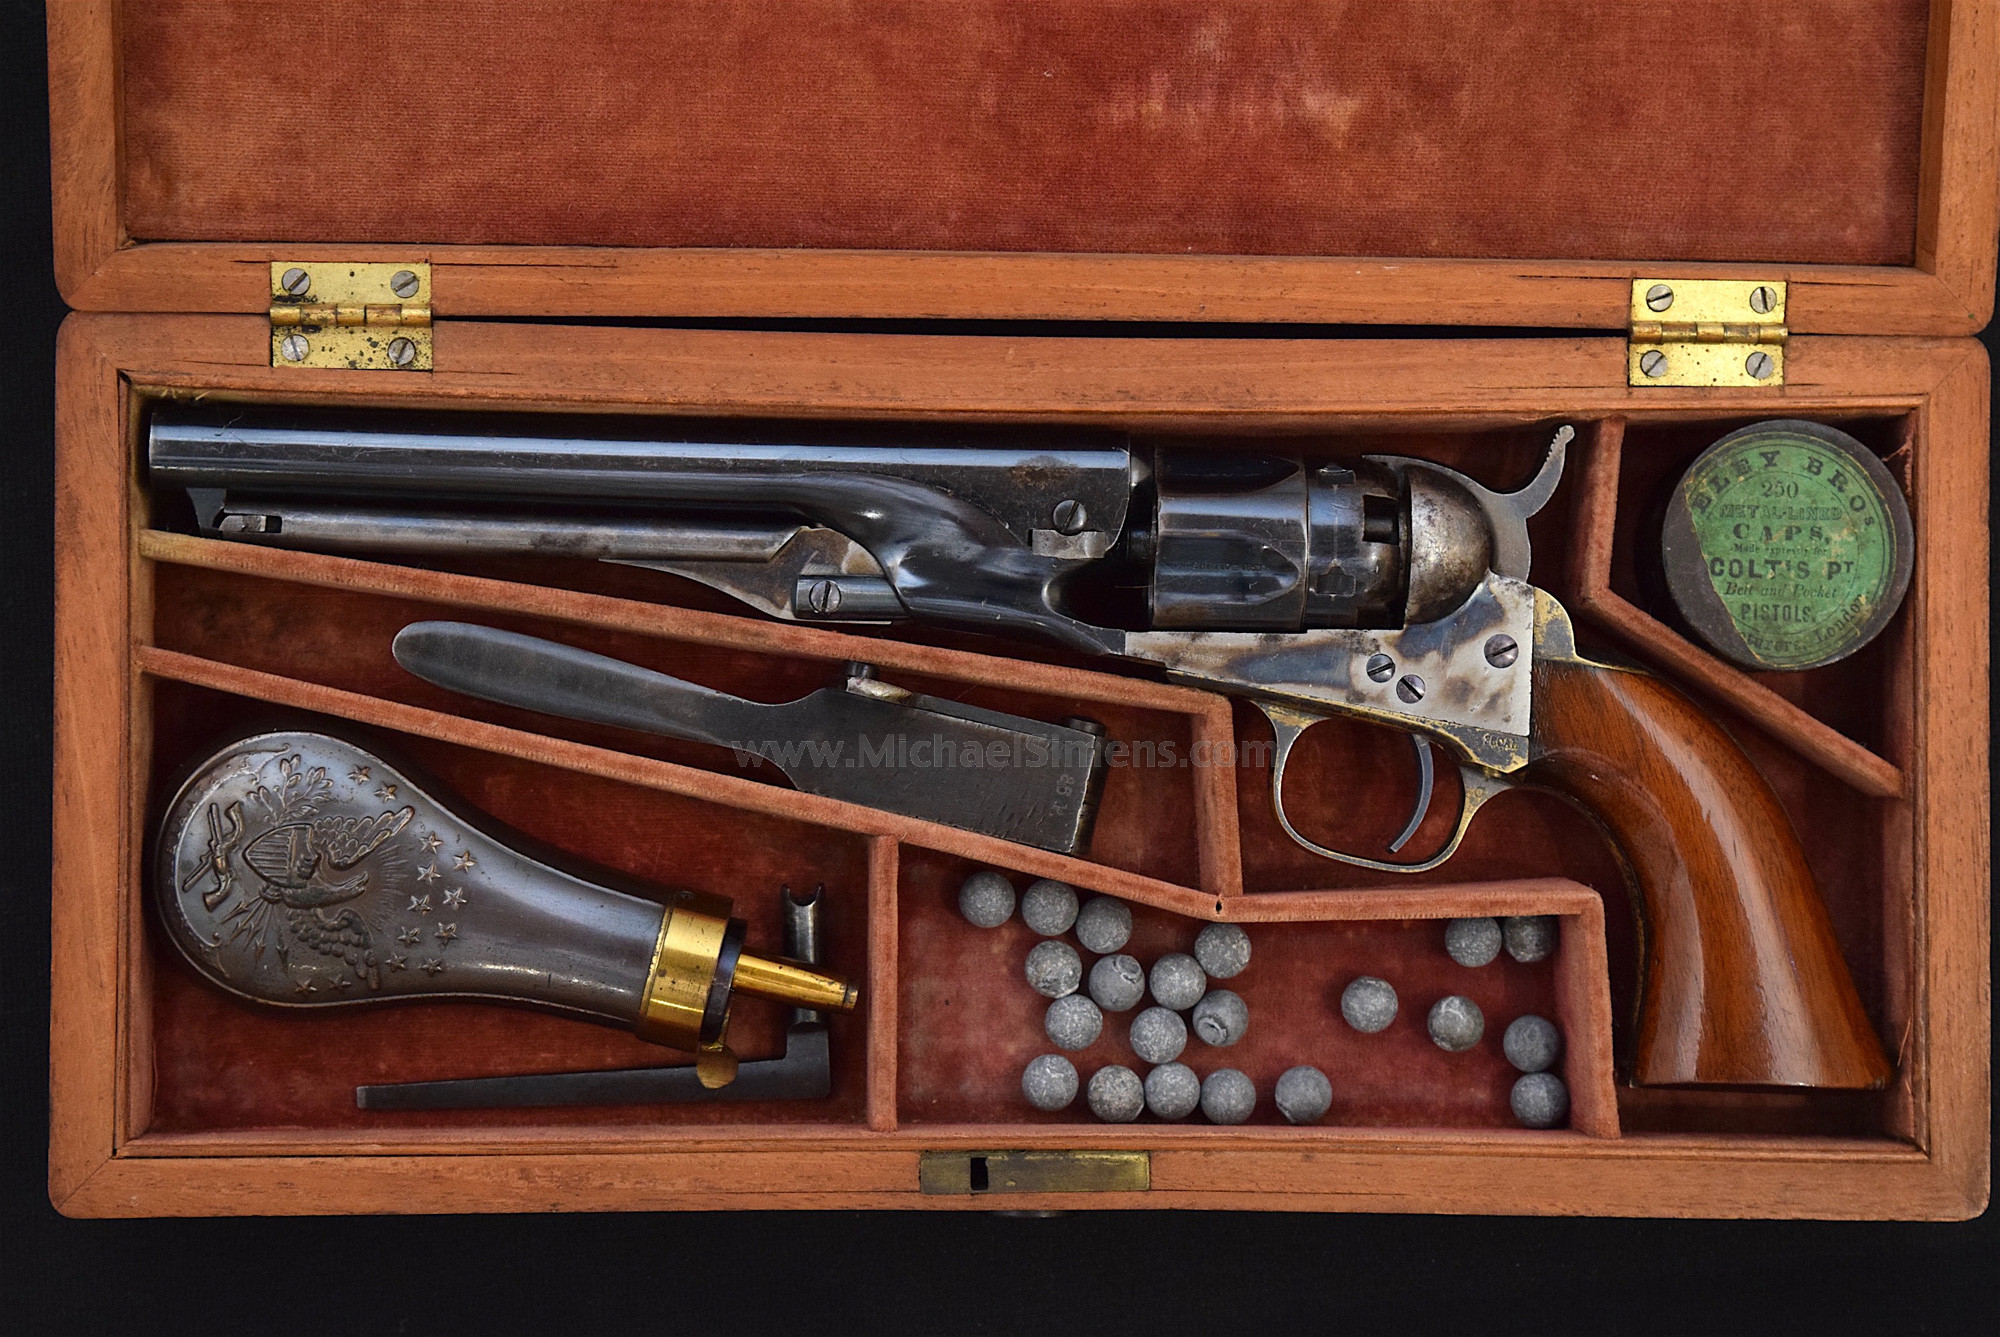 EXCELLENT COLT 1862 POLICE REVOLVER CASED WITH ACCESSORIES